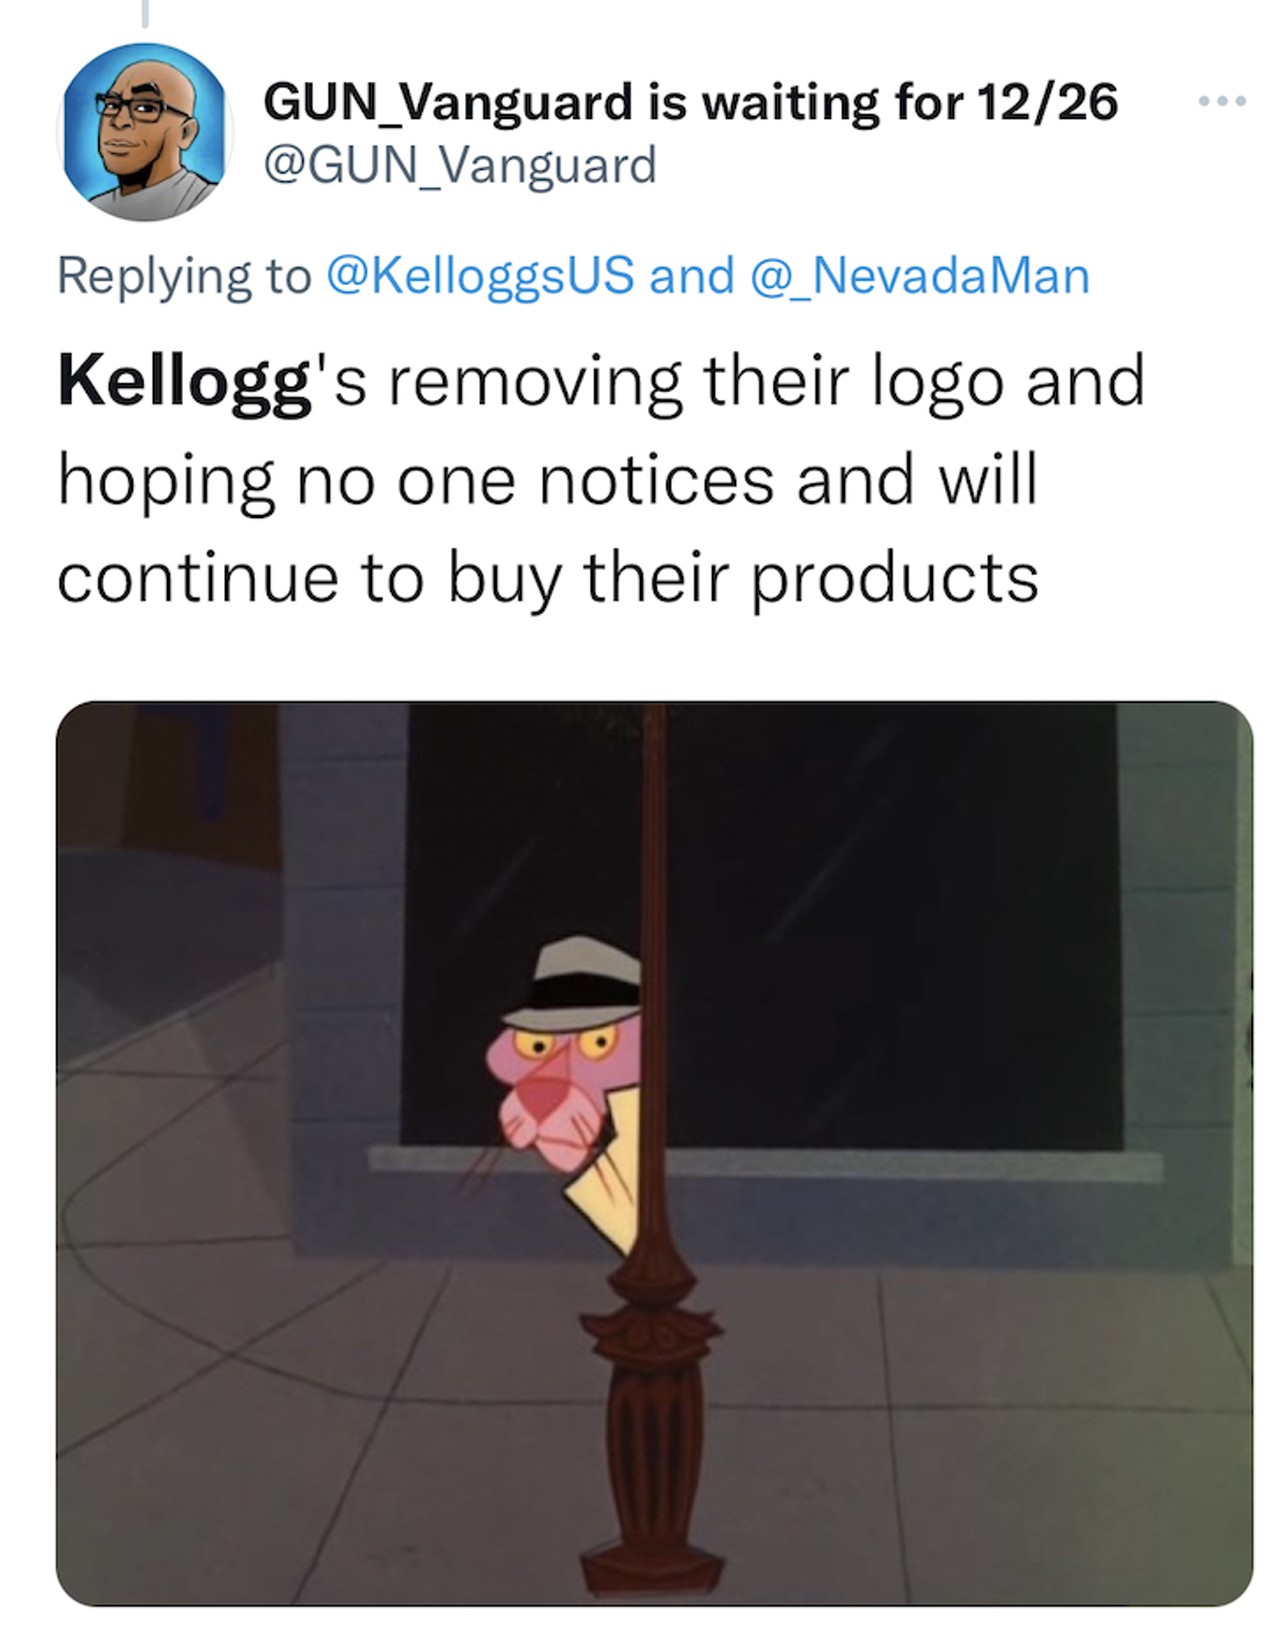 Twitter reacts to Kellogg's removing its name from products and its recent food quality